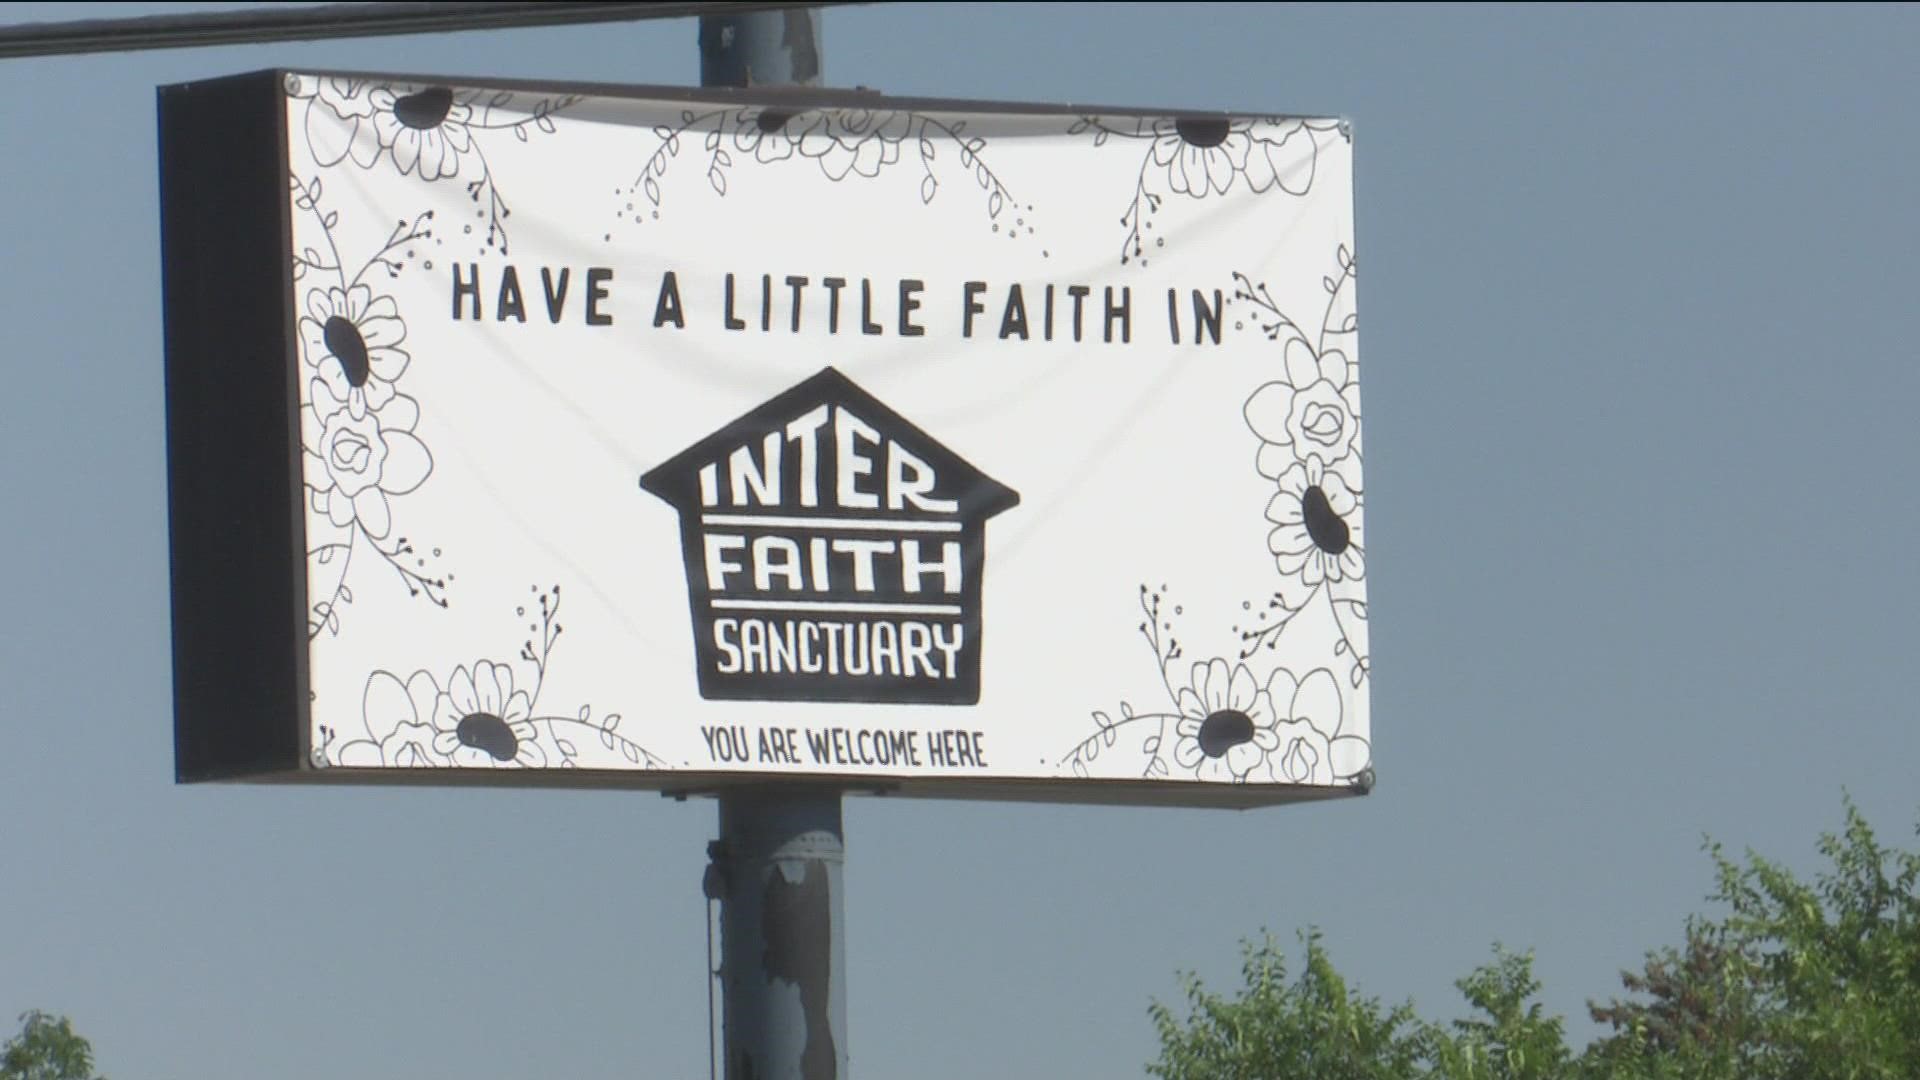 After the Boise City Council overturned Planning and Zoning's rejection of Interfaith's conditional use permit, the neighborhood is now calling for a judicial review